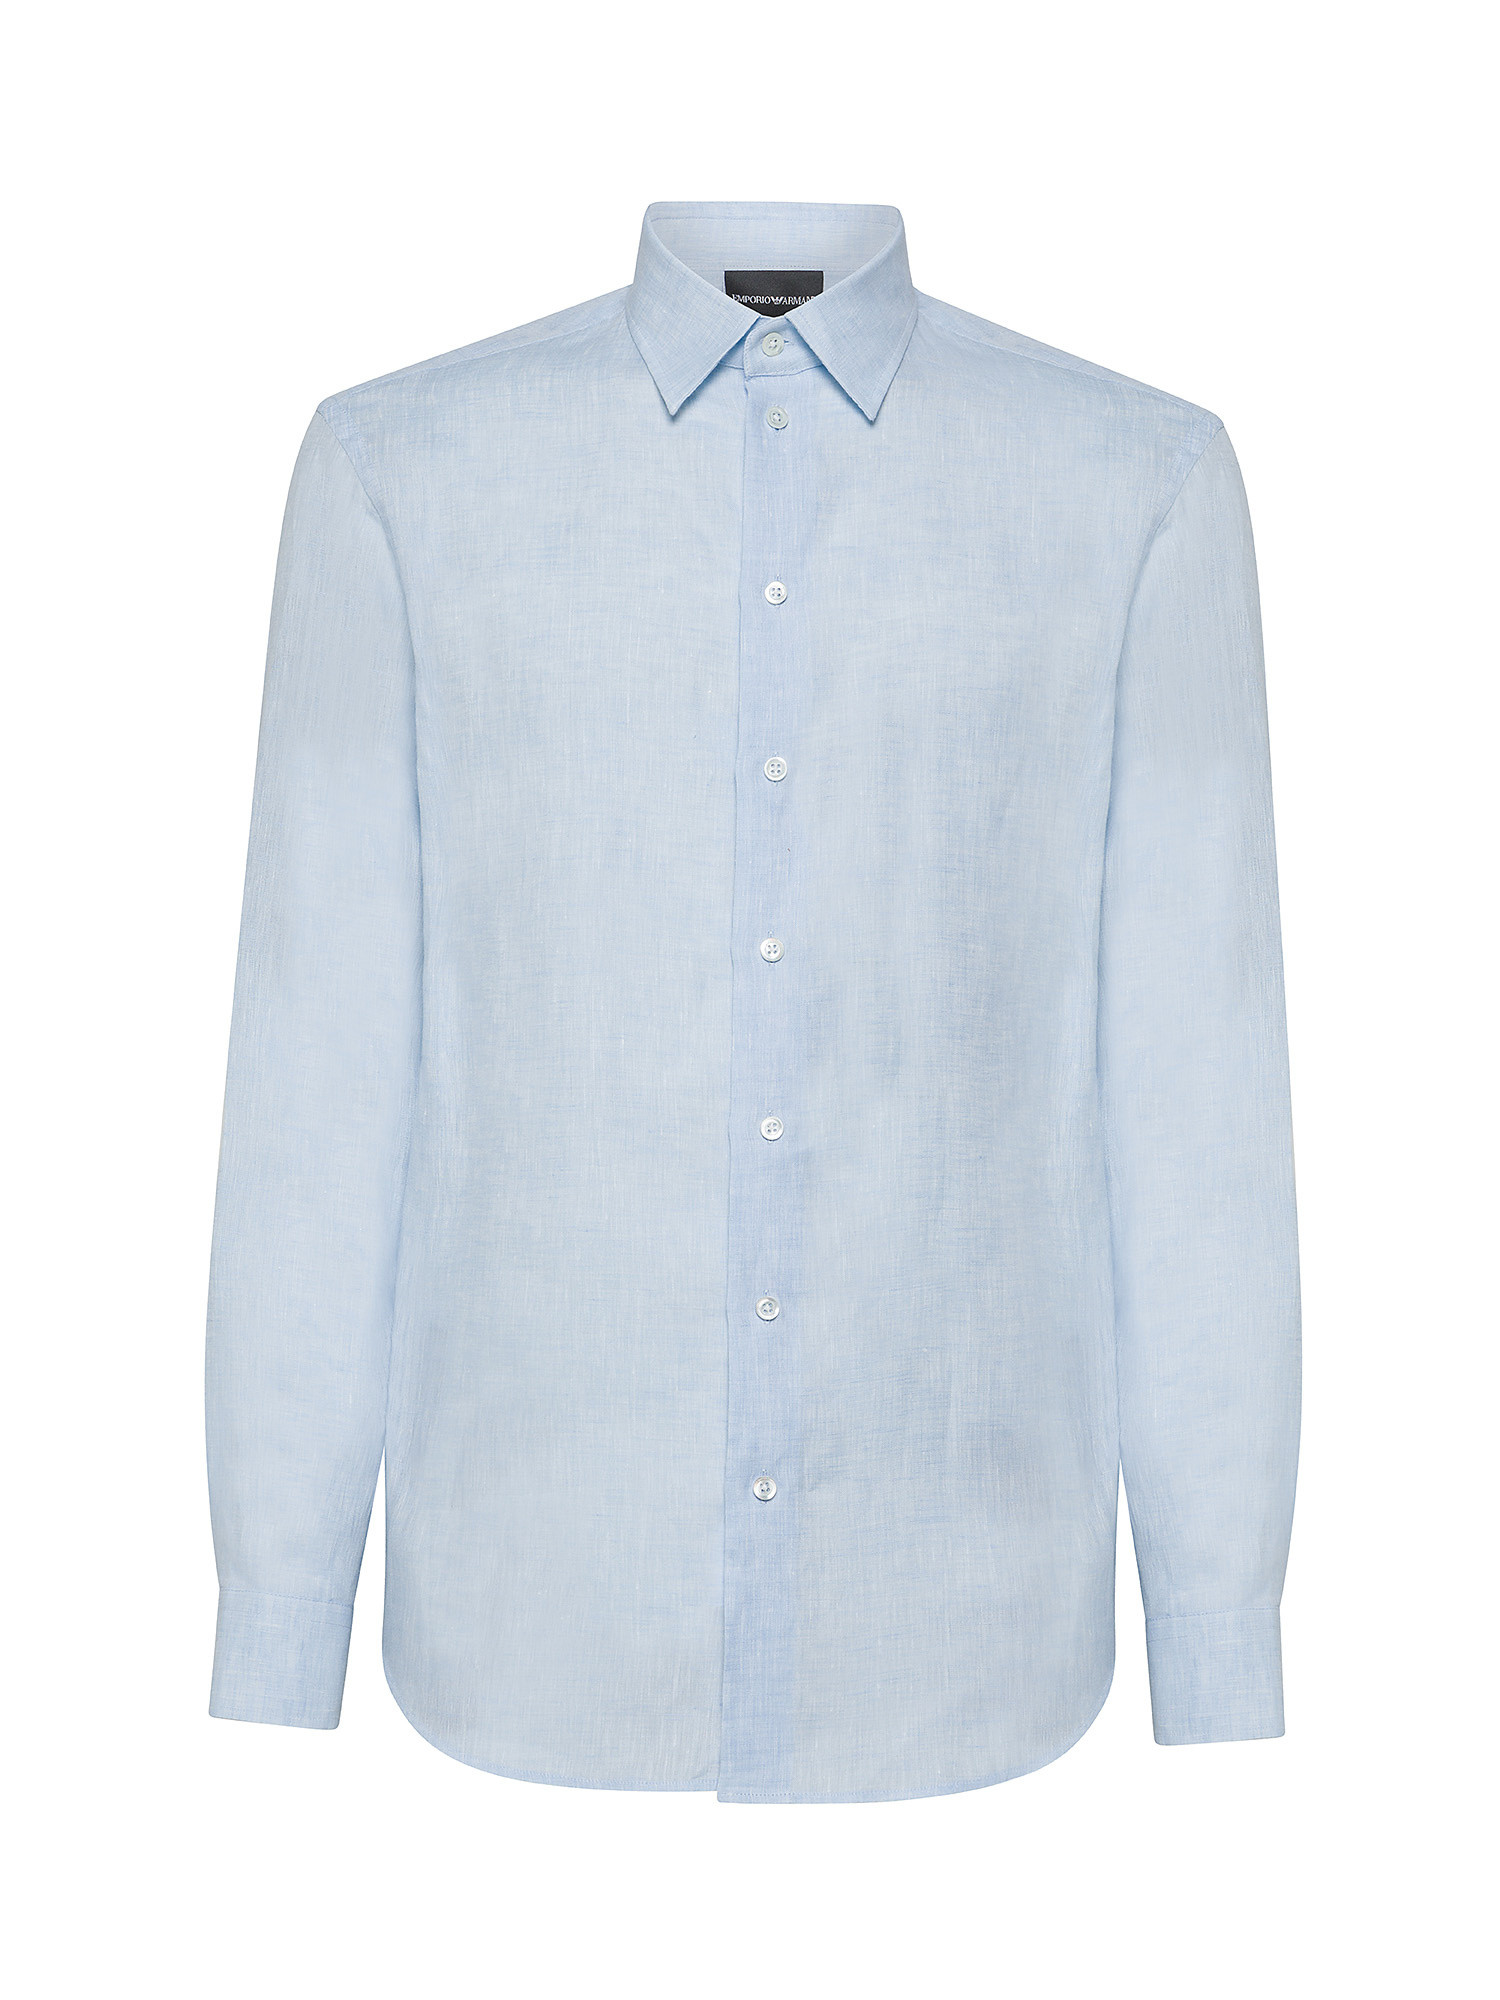 Emporio Armani - Relaxed fit shirt in pure linen, Light Blue, large image number 1